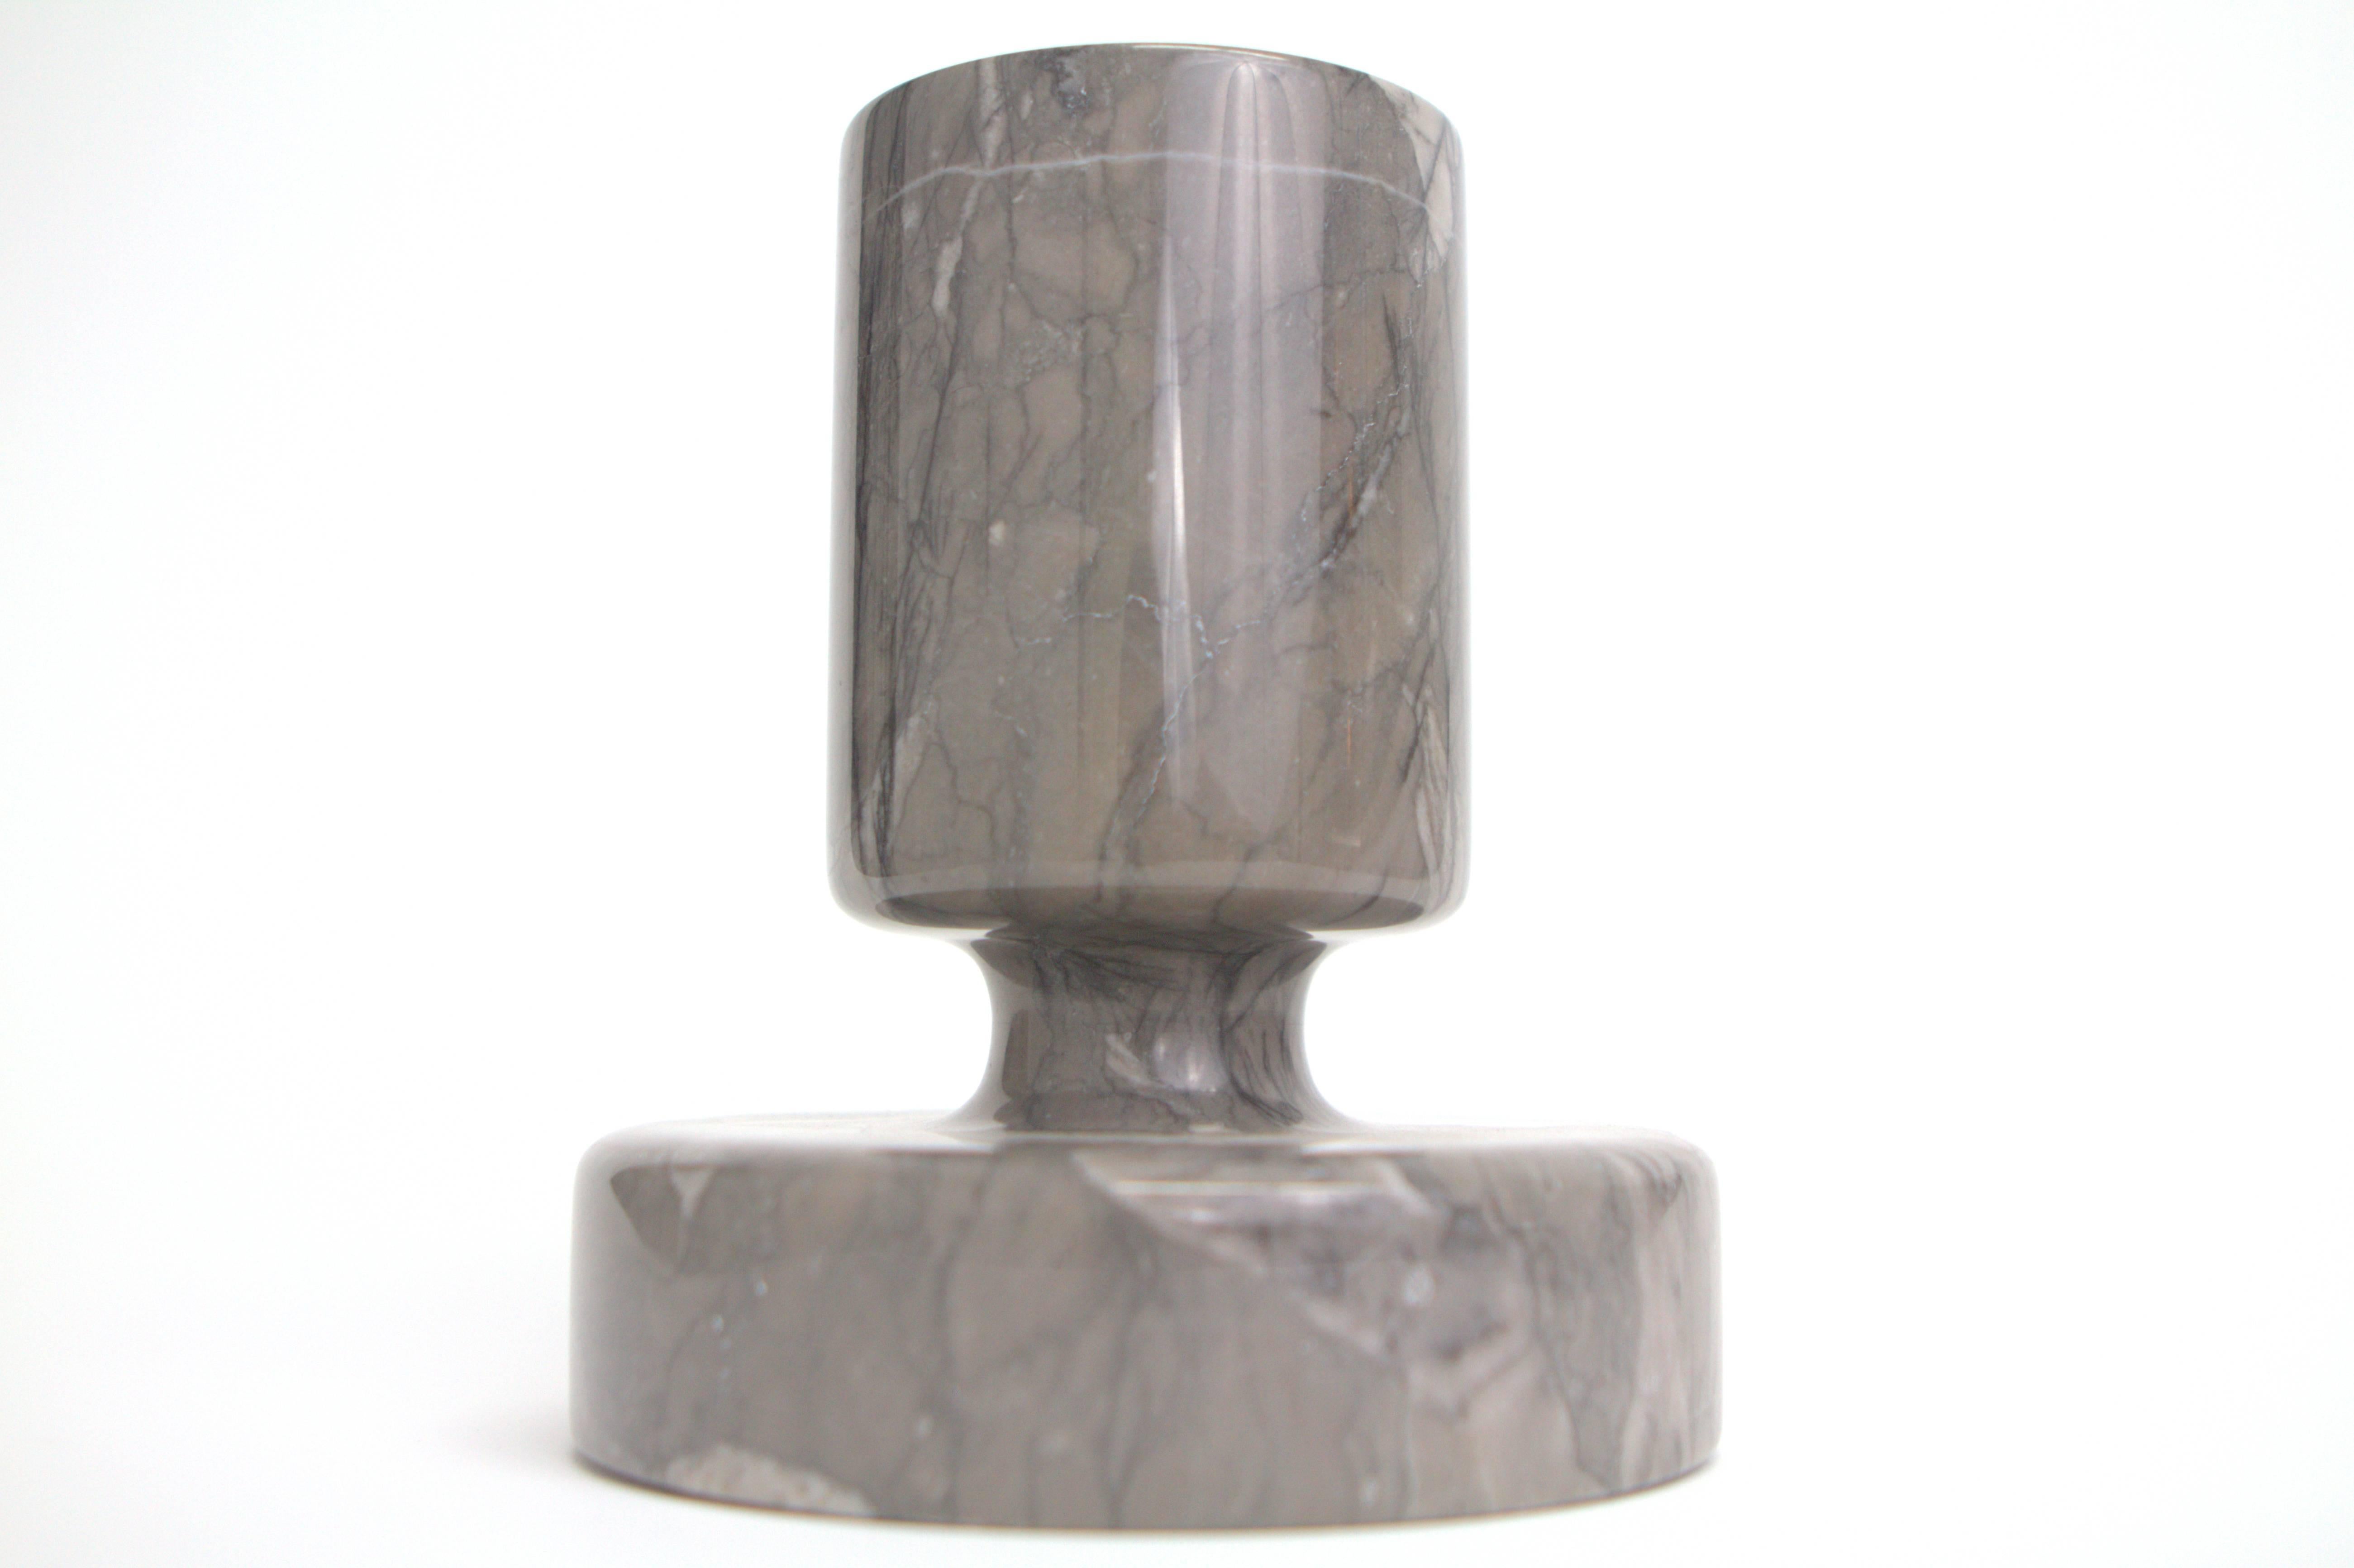 Beautifully crafted marble vessel designed by Angelo Mangiarotti distributed by Knoll. Can be a vase or pedestal bowl depending on orientation with small opening at 3.38